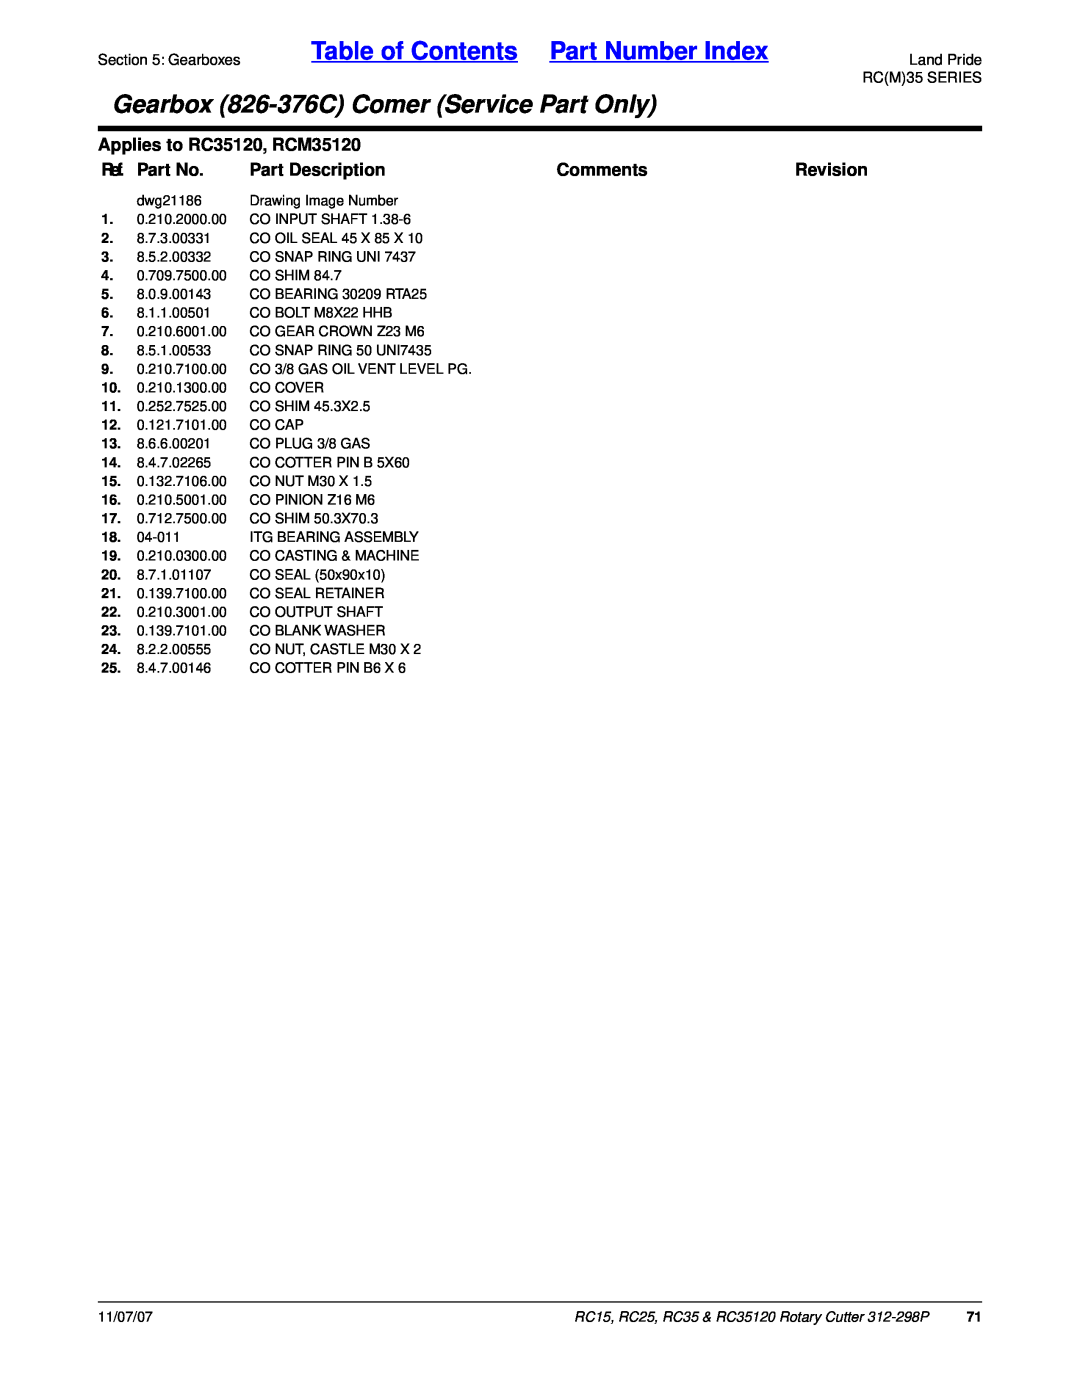 Land Pride RC15 Table of Contents Part Number Index, Gearbox 826-376CComer Service Part Only, Applies to RC35120, RCM35120 